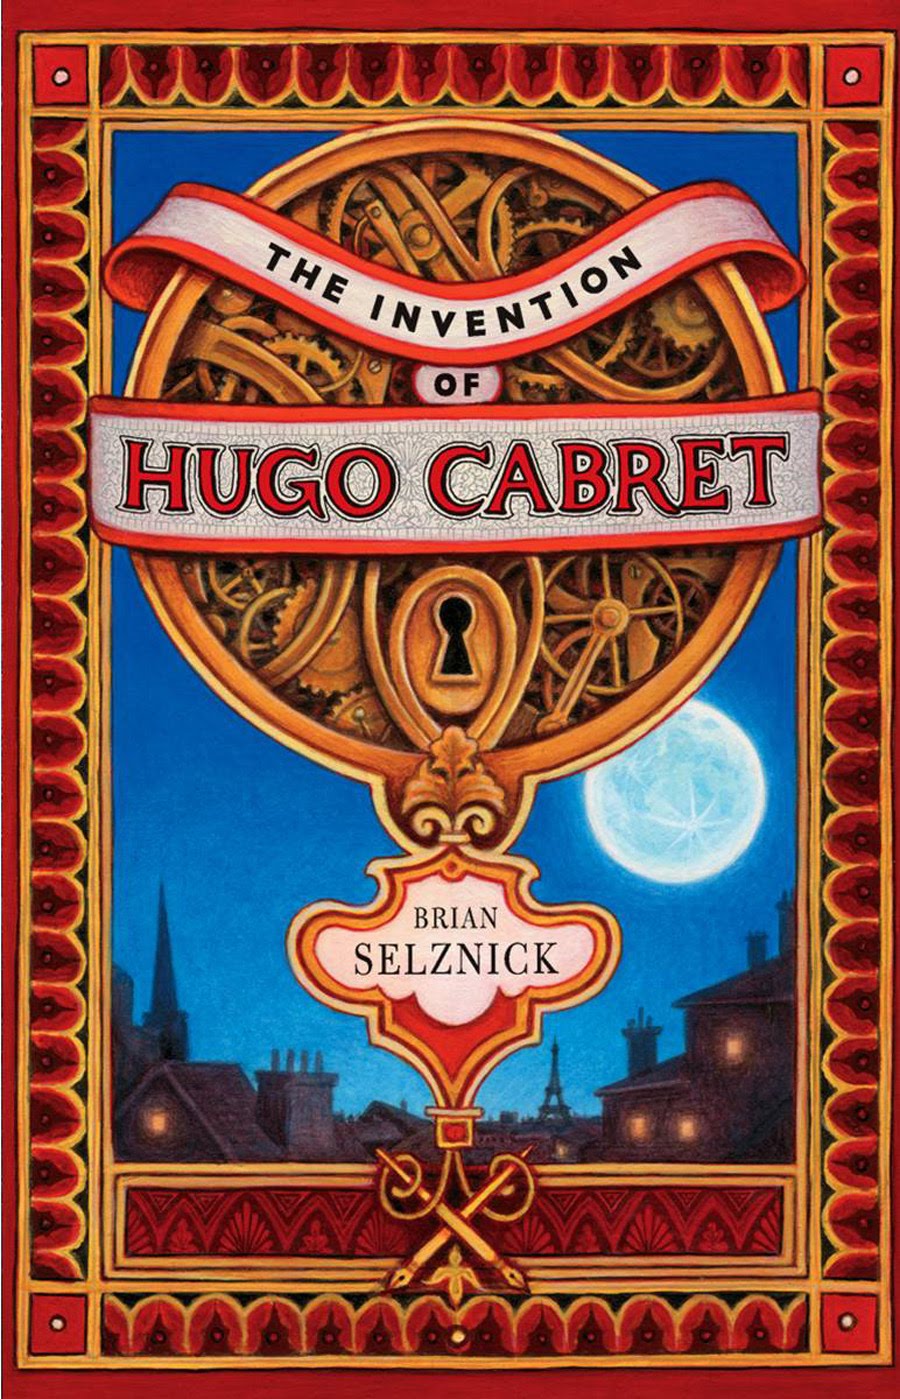 The invention of hugo cabret by